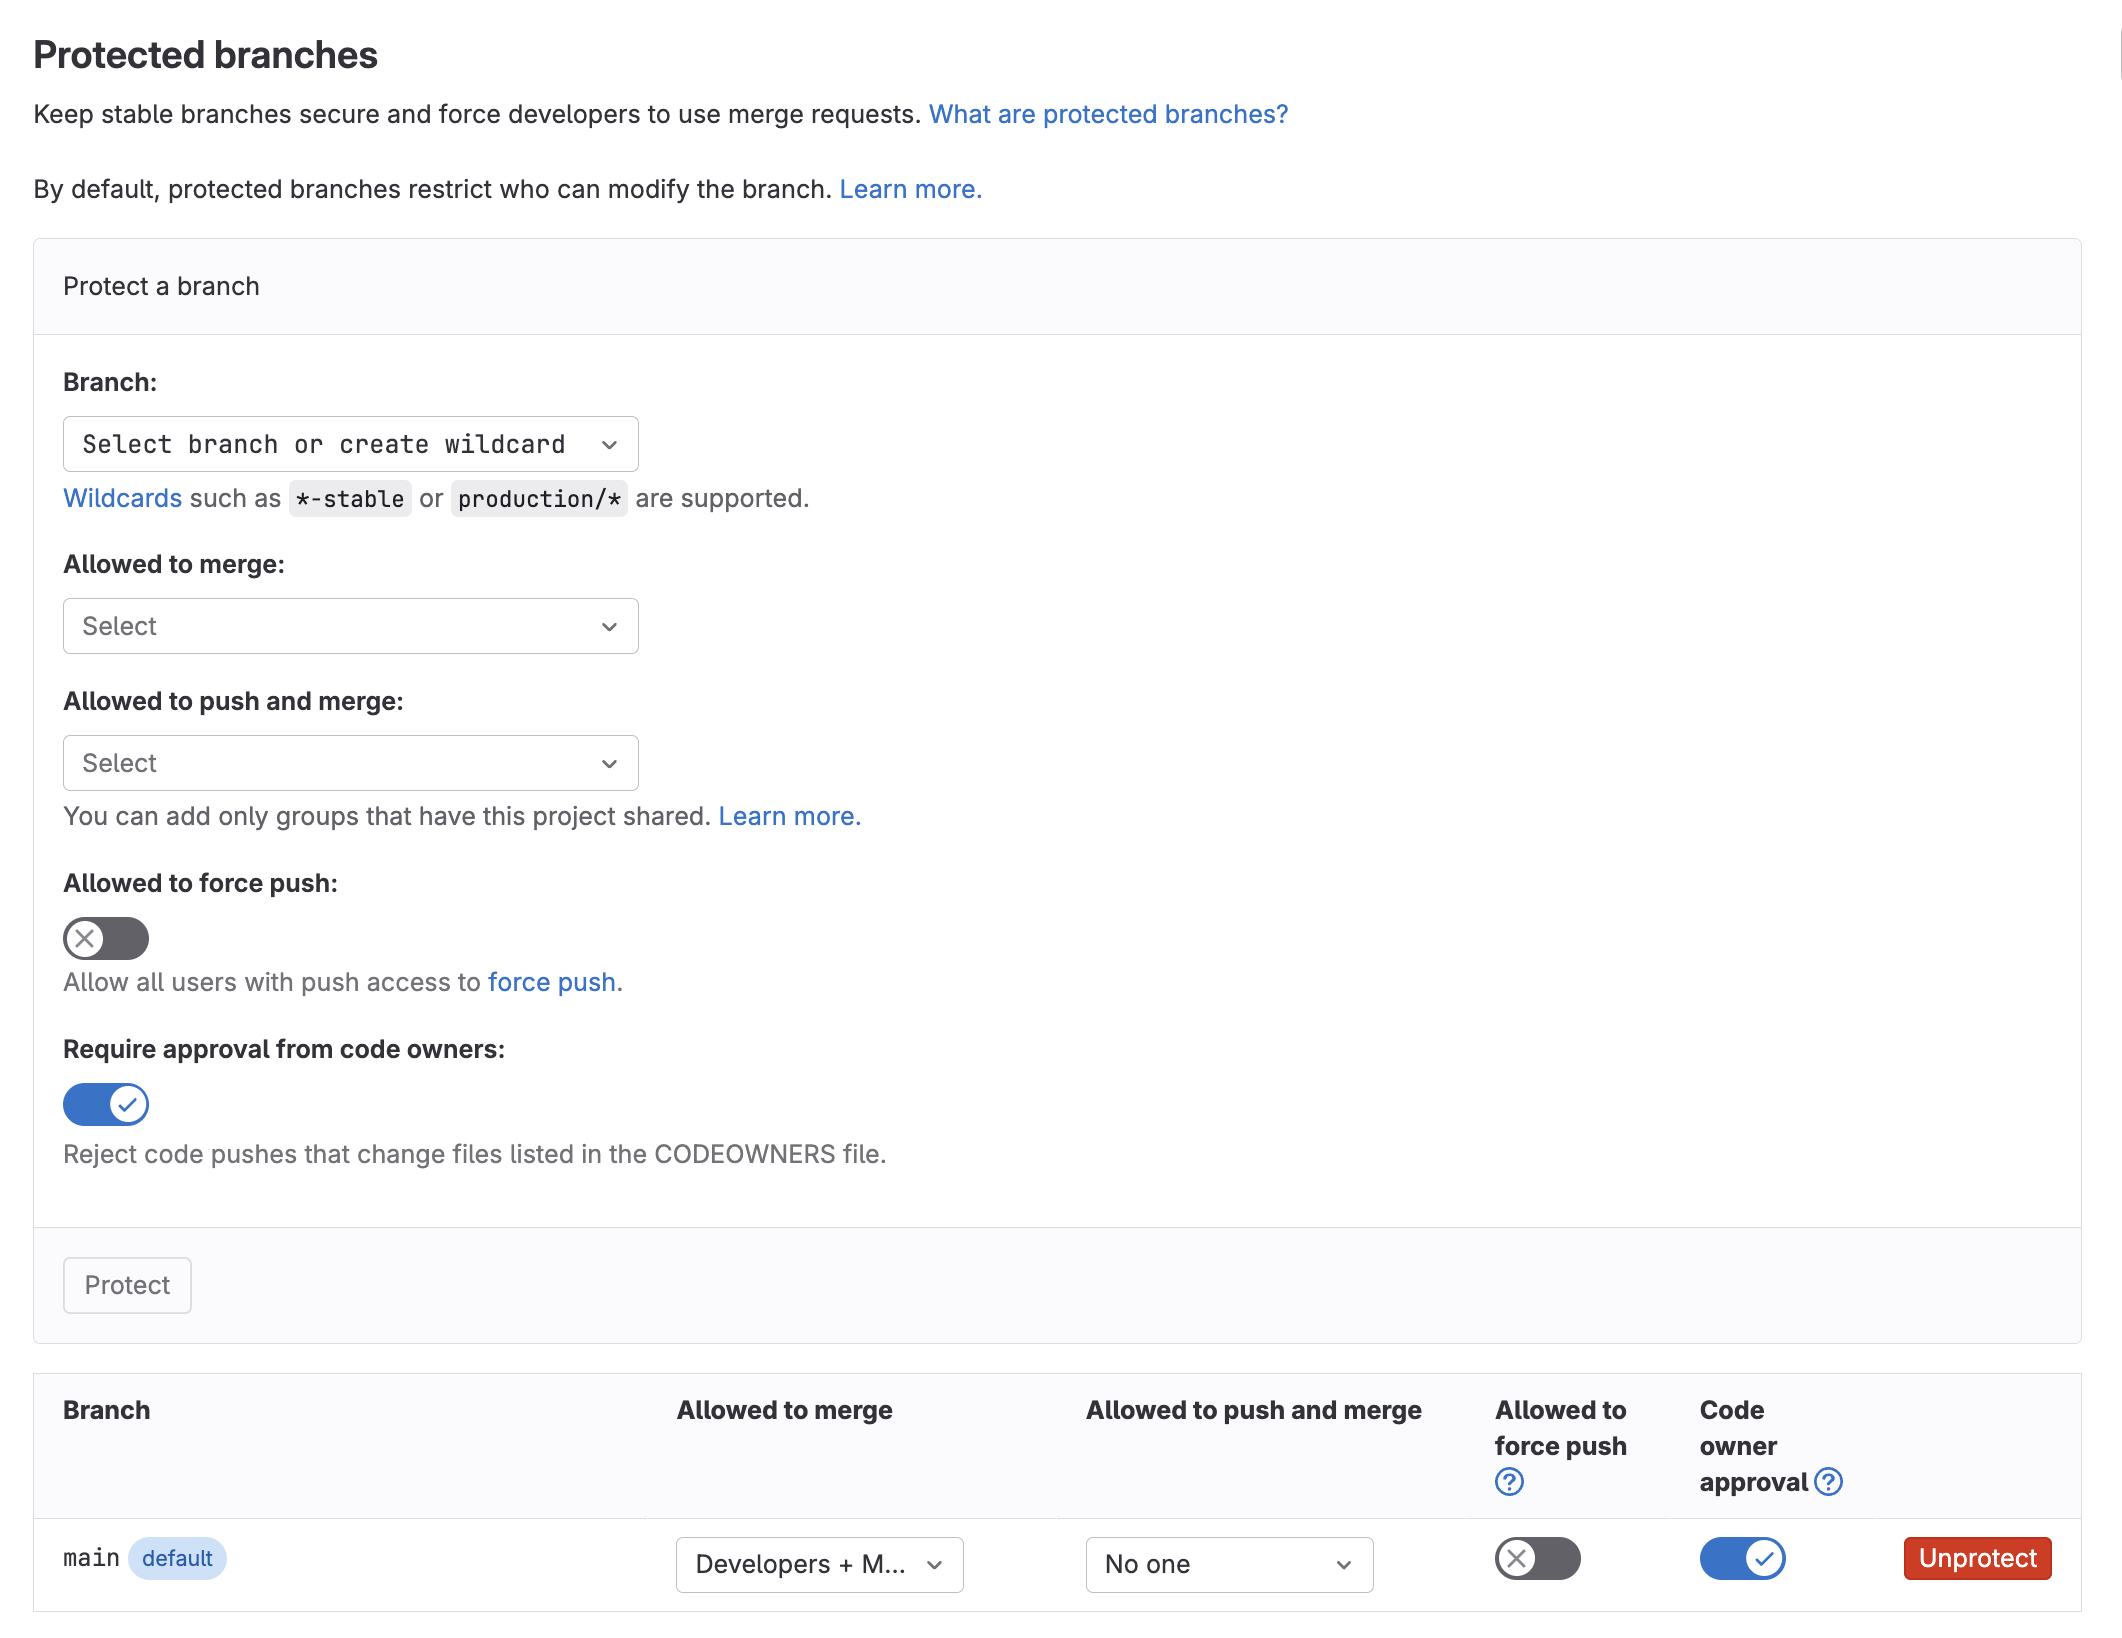 protected-branches-settings-within-gitlab